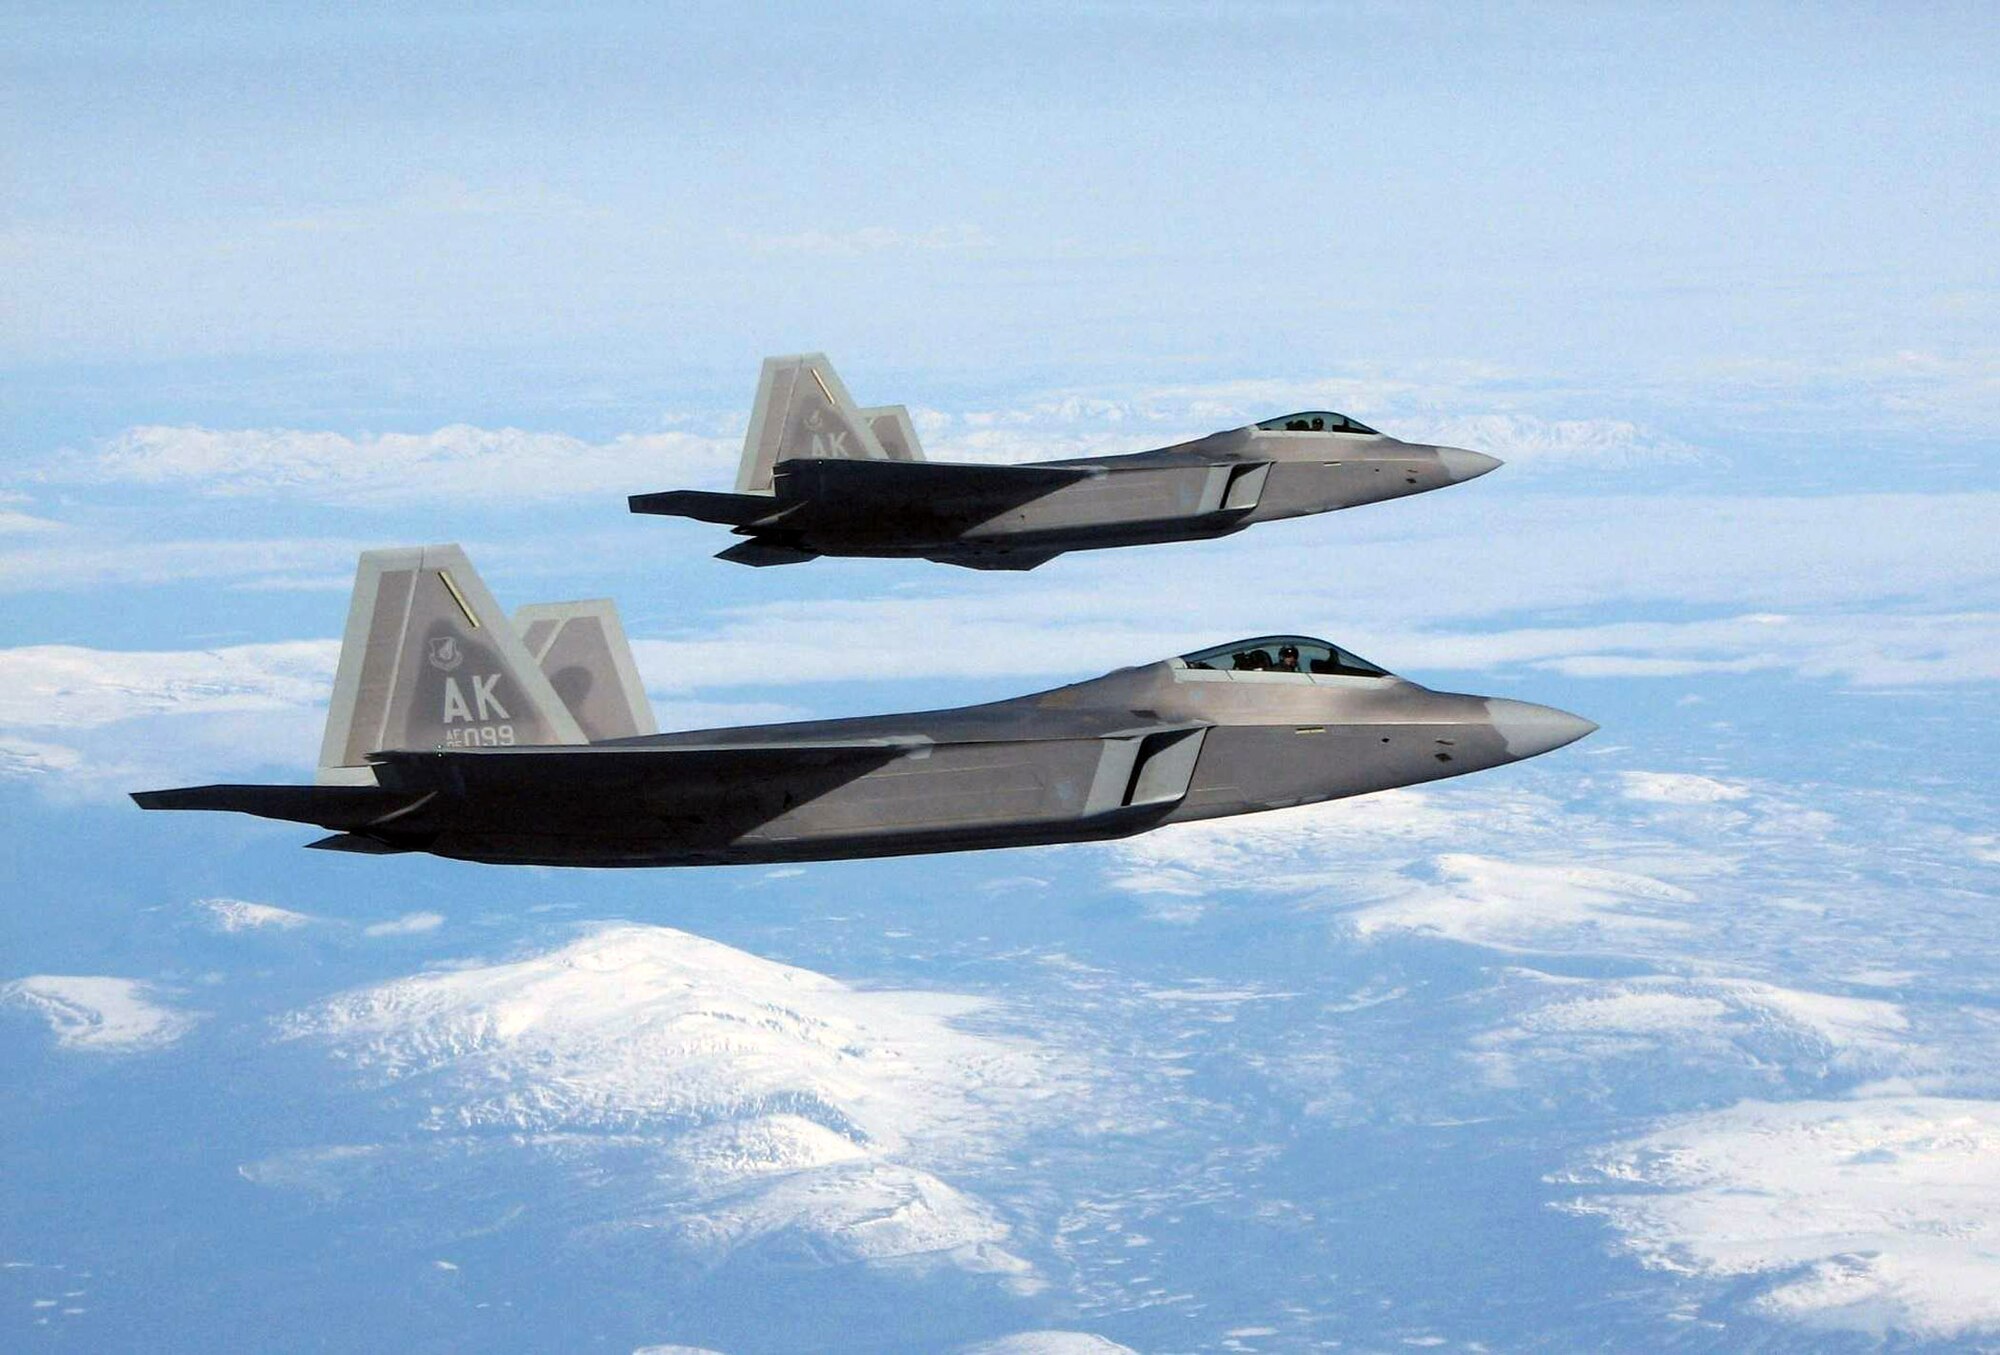 Two F-22 Raptors fly a Northern Edge 2008 training mission over Alaska May 8. The aircraft are from the 3rd Wing at Elmendorf Air Force Base, Alaska. (U.S. Air Force photo/Tech. Sgt. Mikal Canfield)
